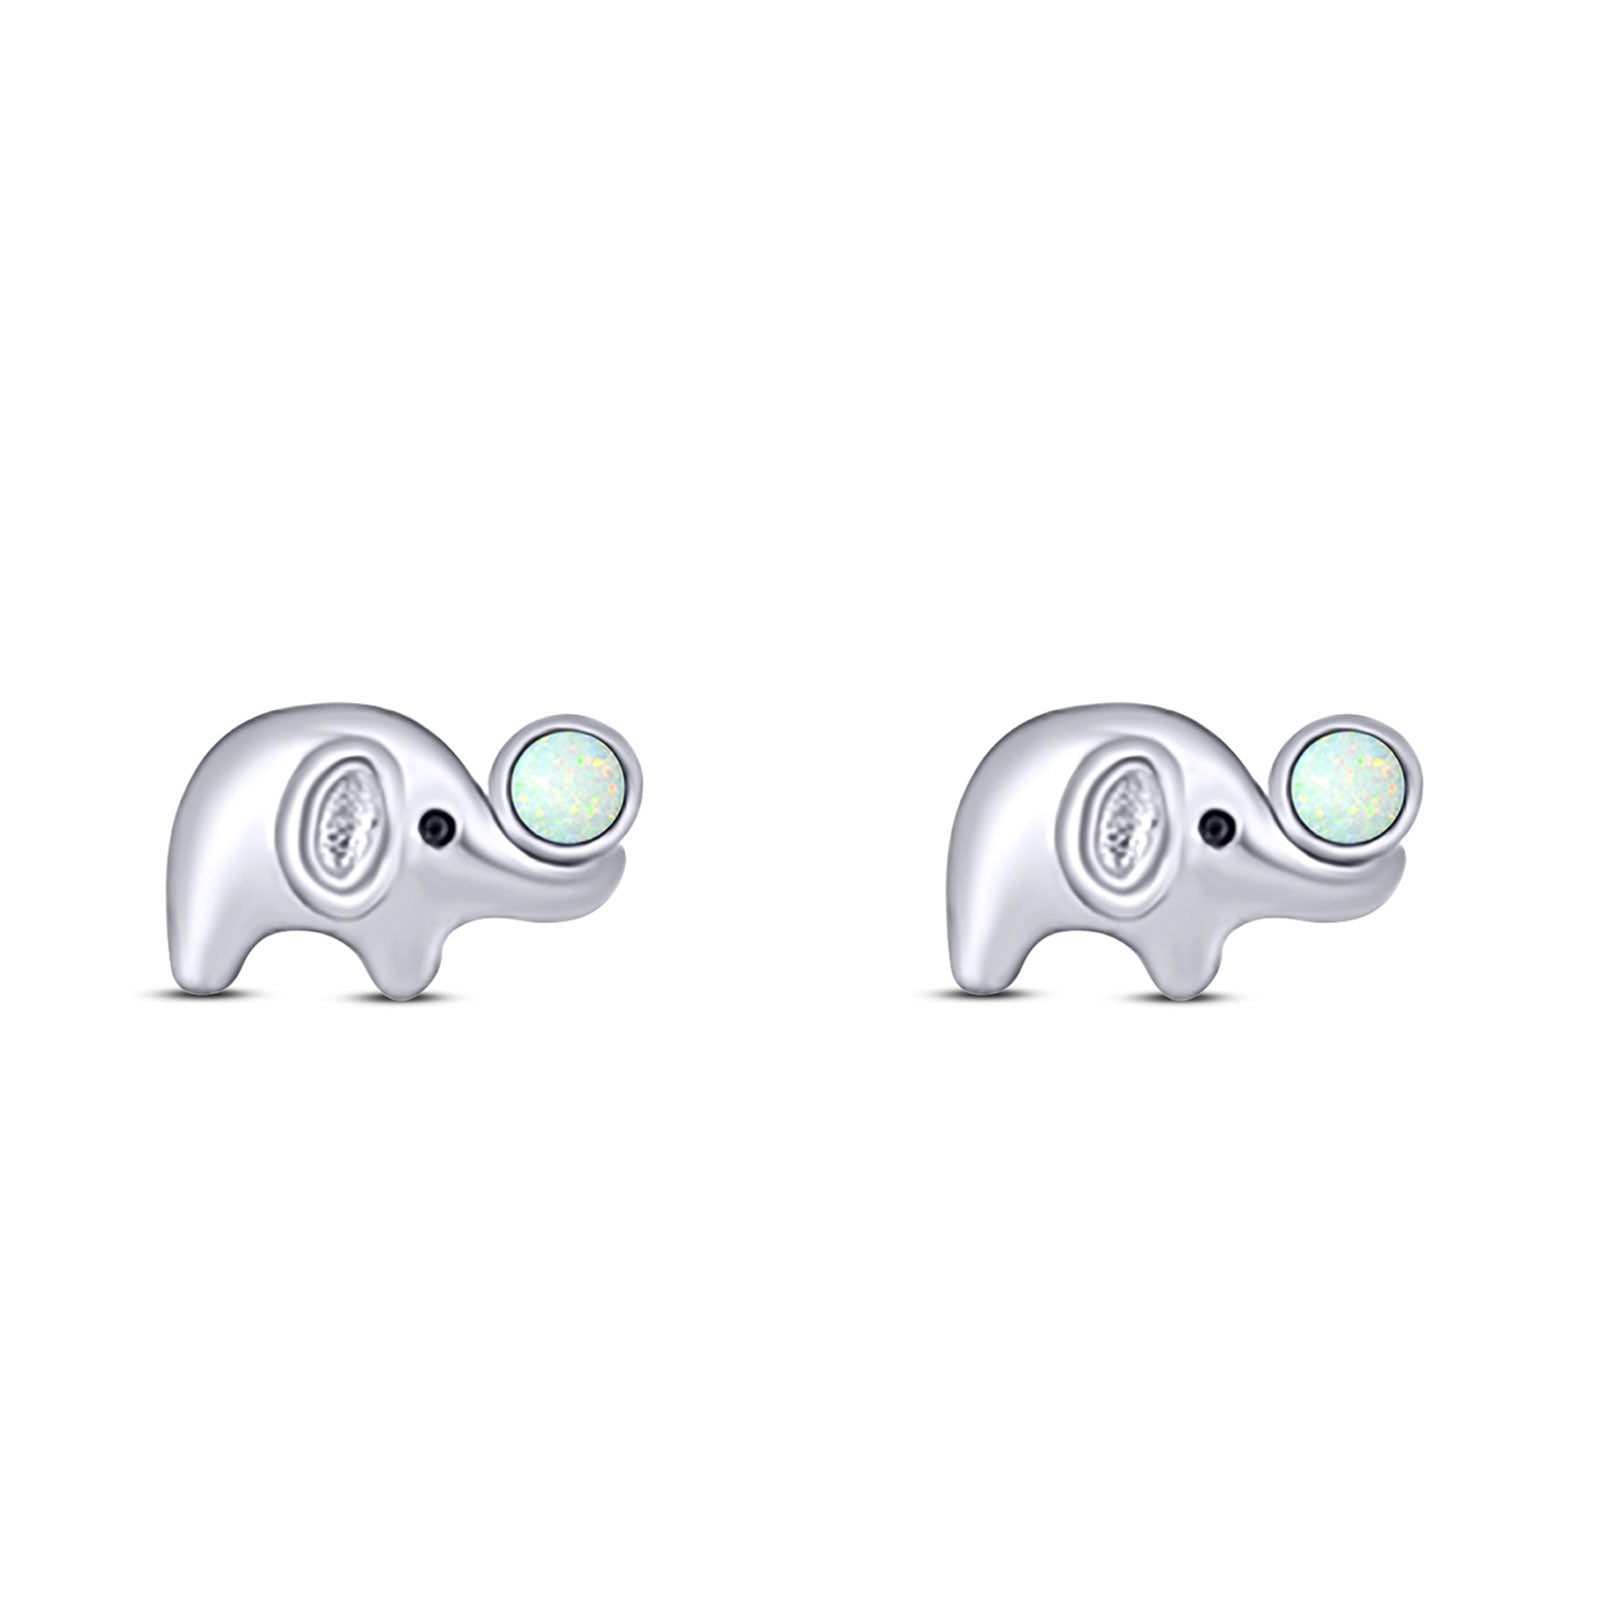 Elephant Designer Finish Animal Stud Earring Created White Opal Solid 925 Sterling Silver (6.4mm)